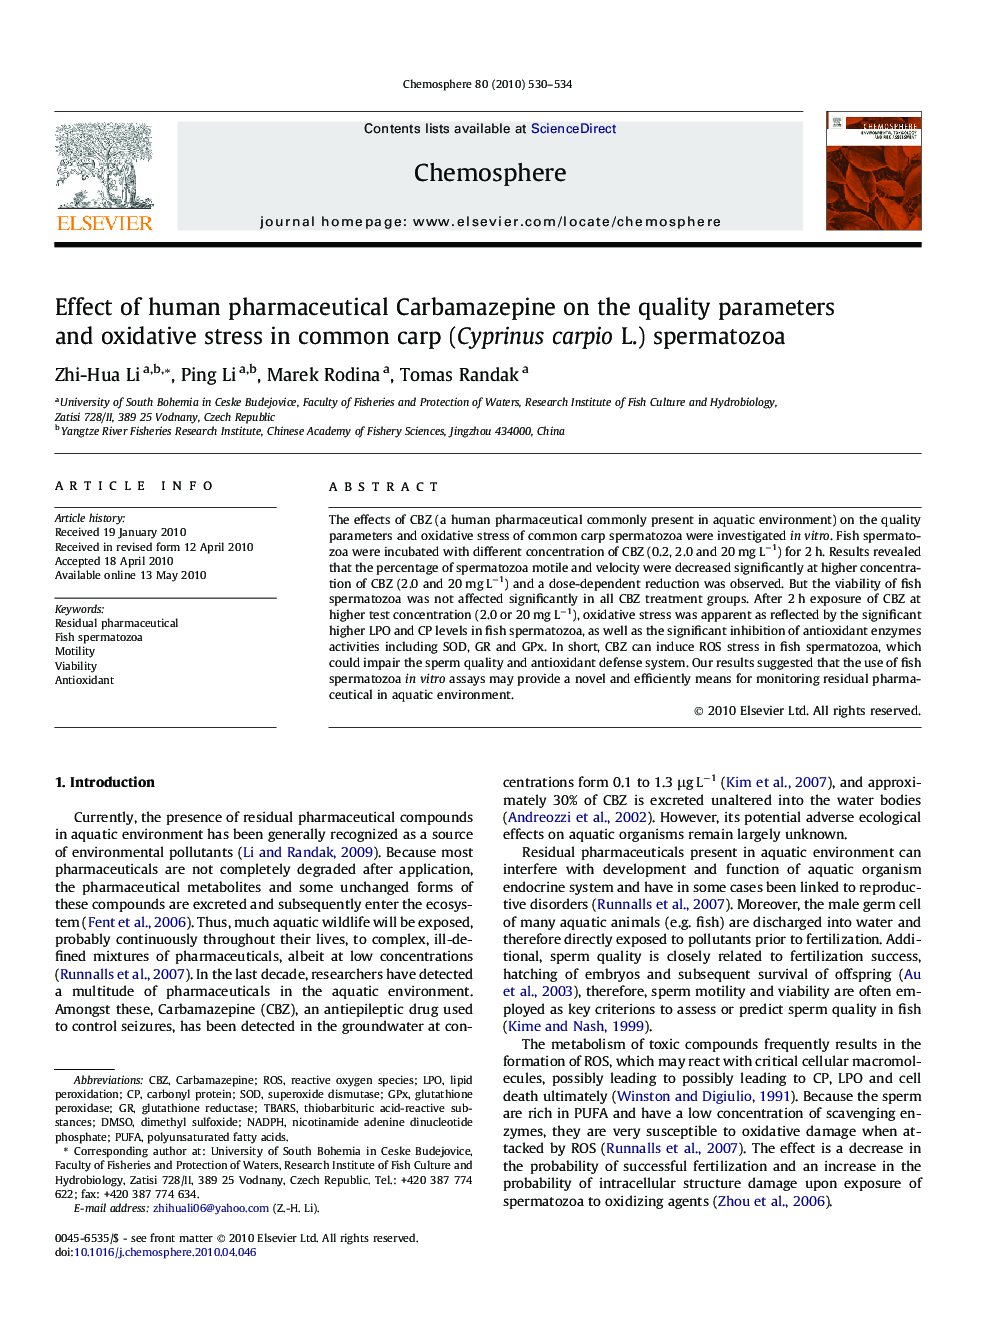 Effect of human pharmaceutical Carbamazepine on the quality parameters and oxidative stress in common carp (Cyprinus carpio L.) spermatozoa